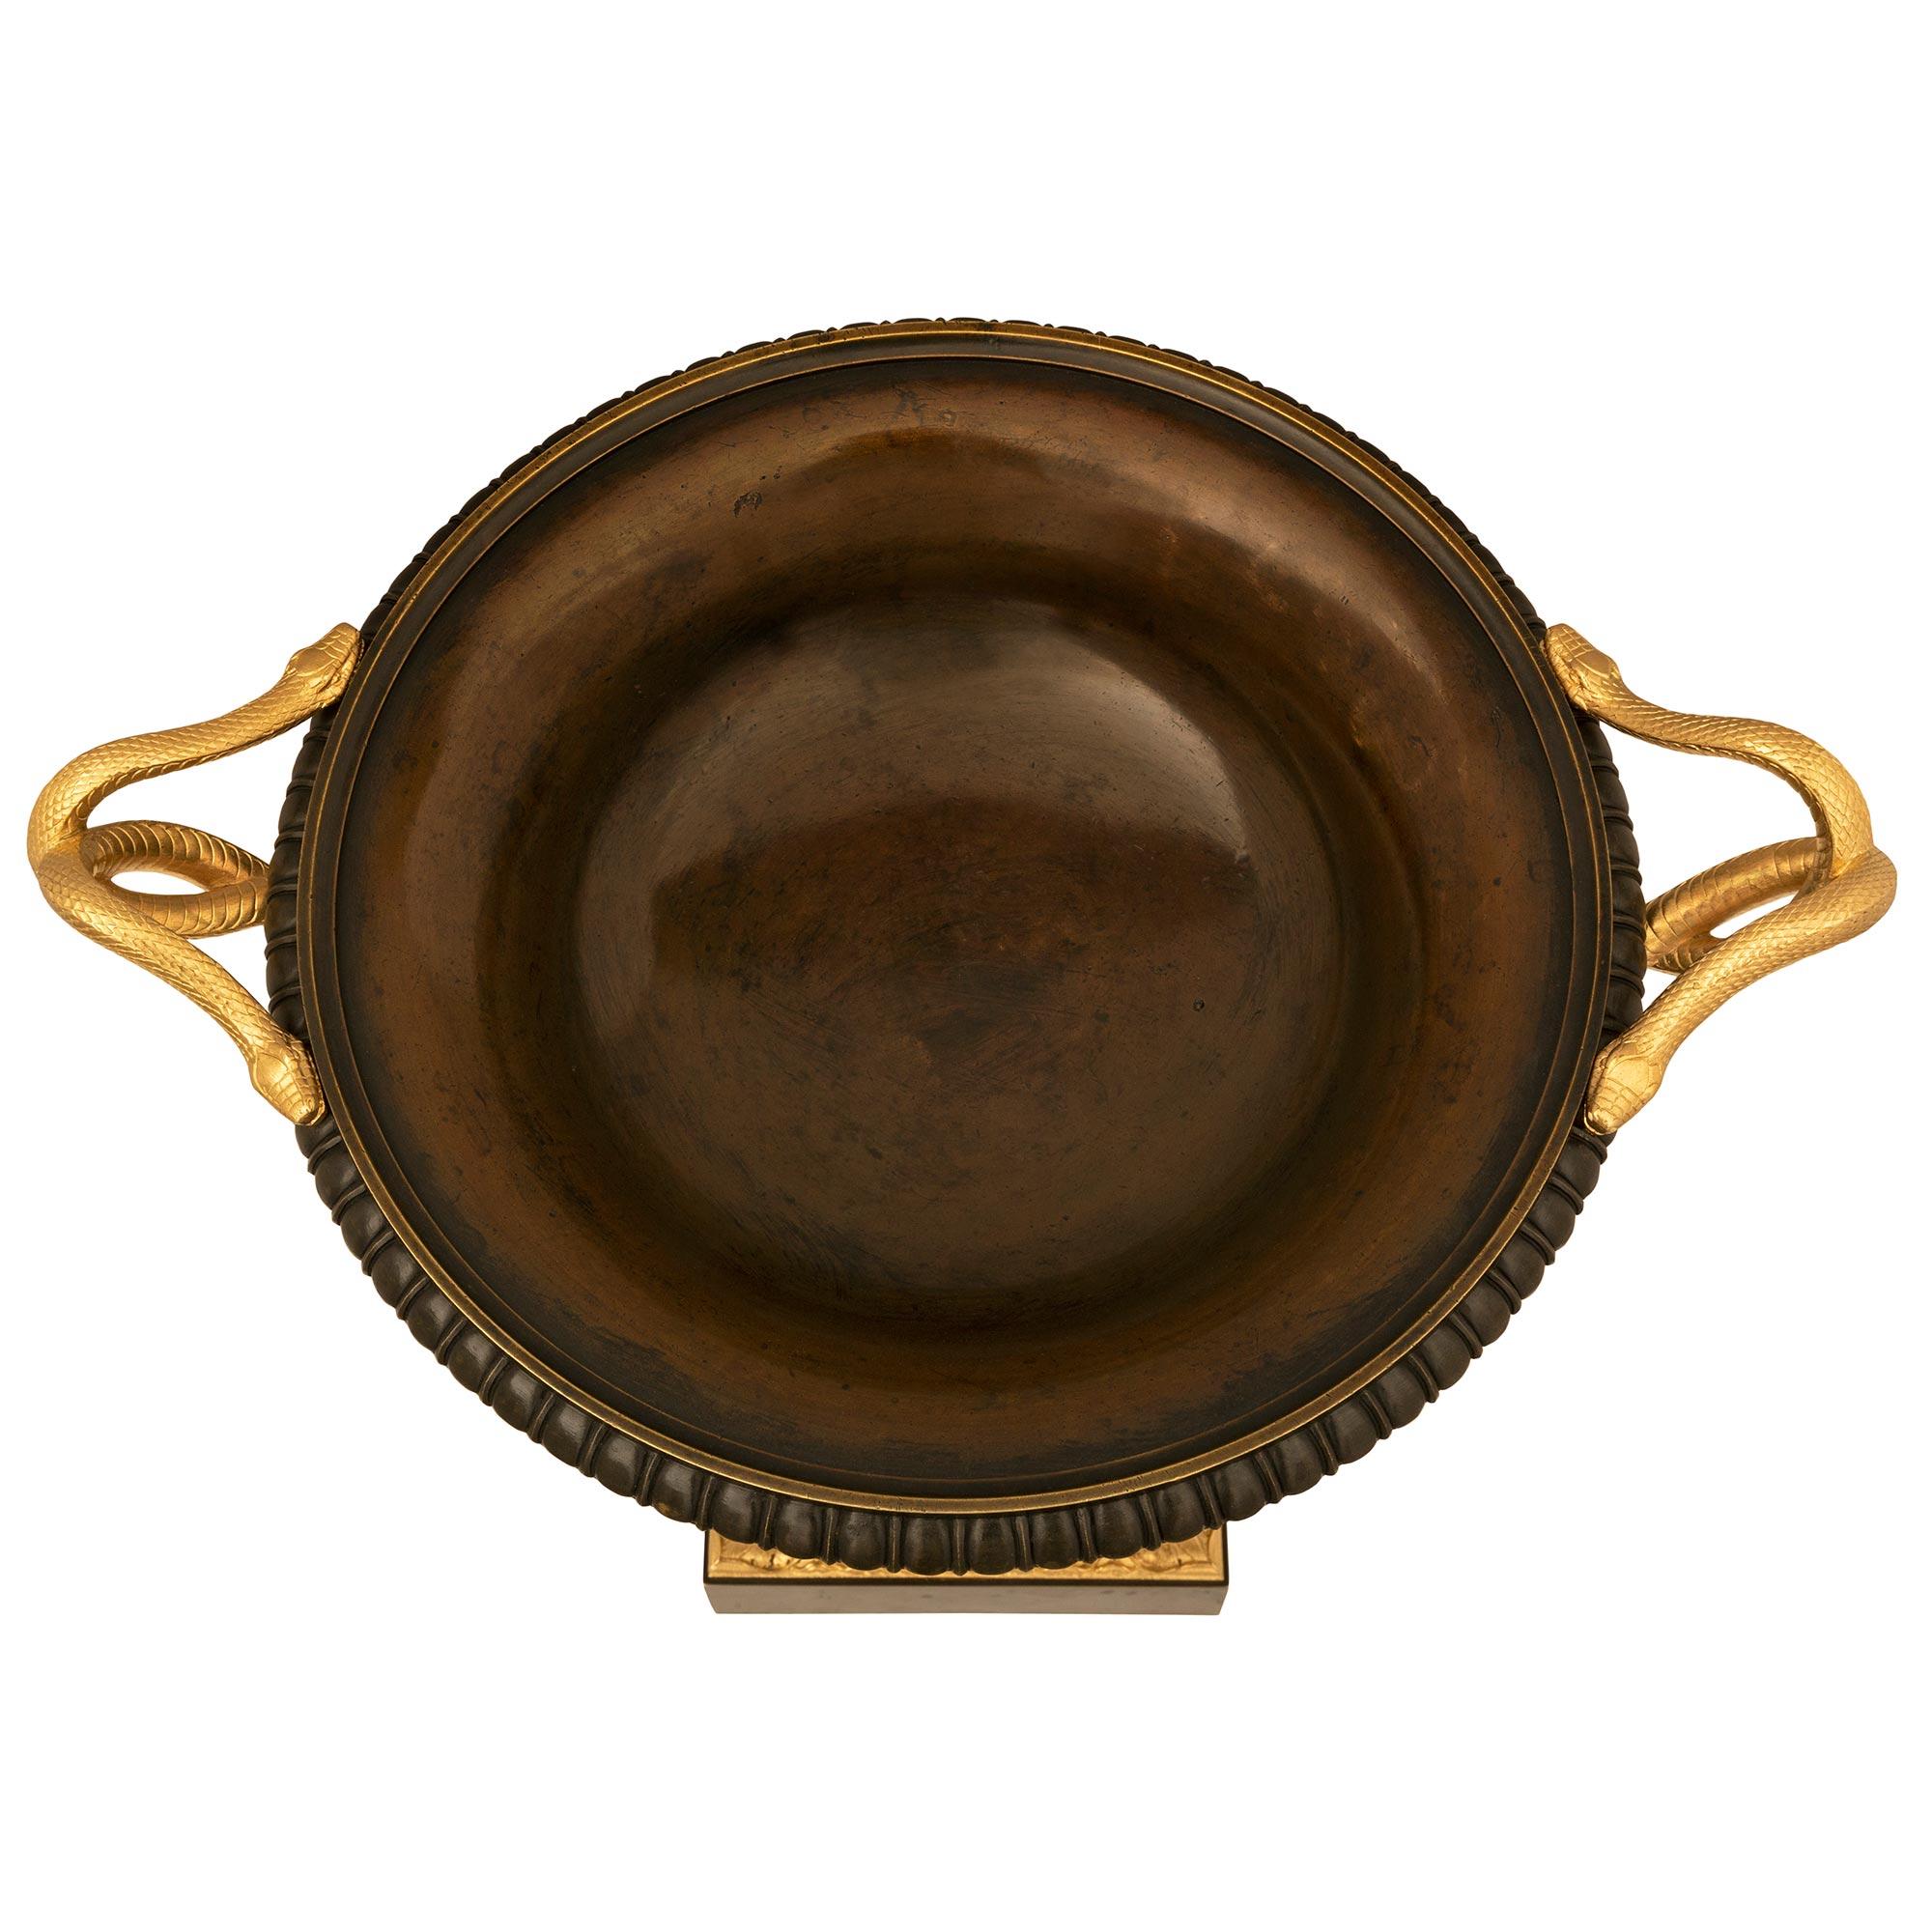 A striking and very high quality French 19th century Neo-Classical st. patinated bronze and ormolu tazza. The tazza is raised by a square base with a beautiful wrap around mottled foliate ormolu band and beautiful richly chased tied berried laurel